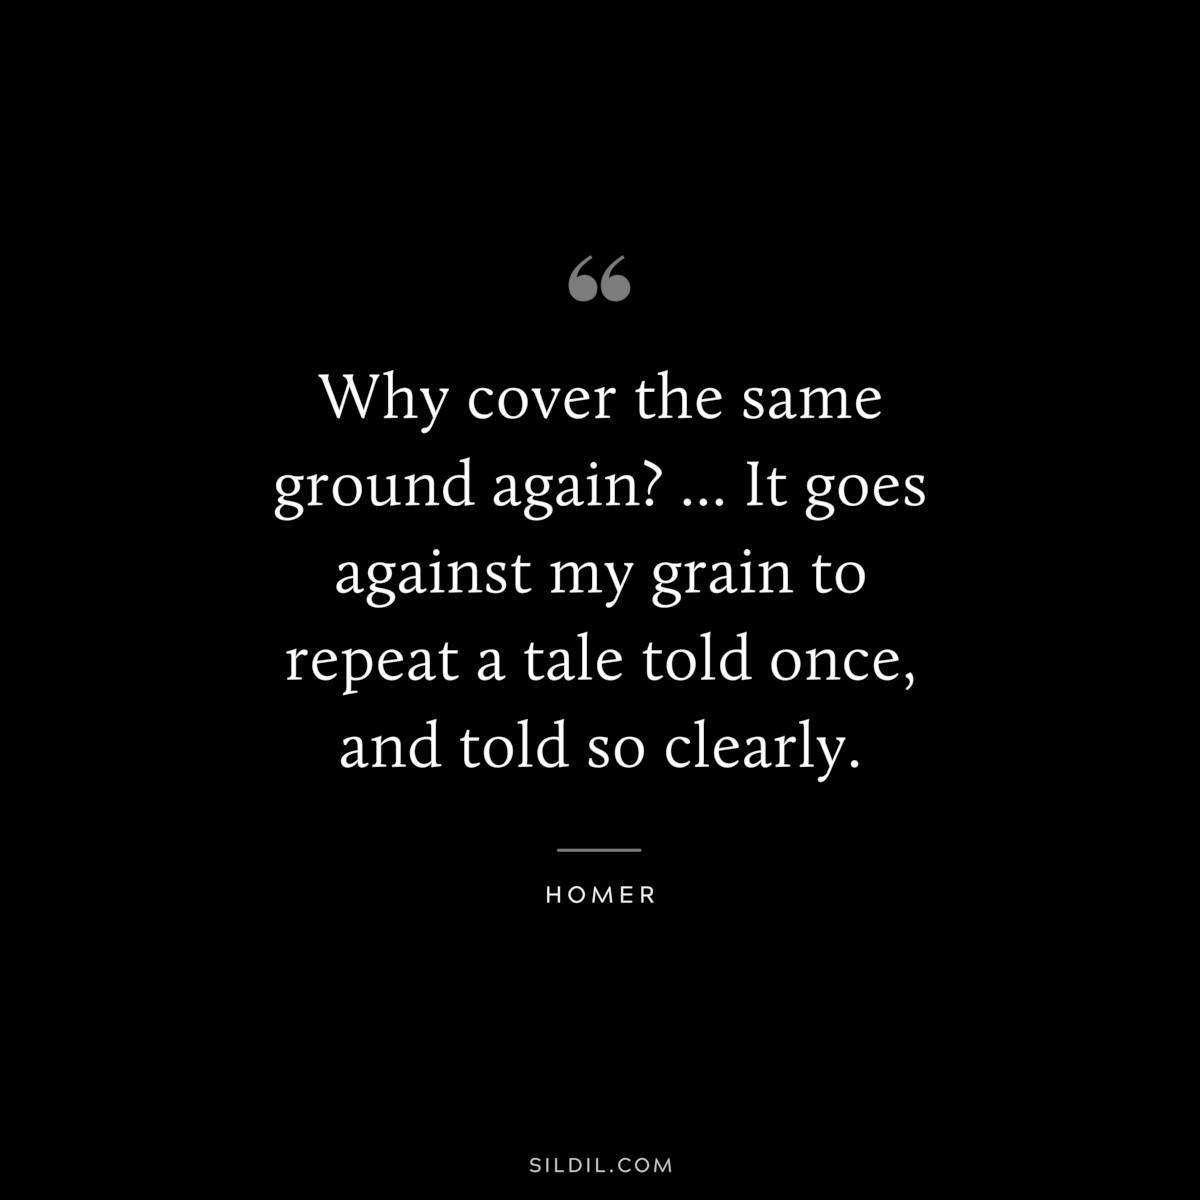 Why cover the same ground again? ... It goes against my grain to repeat a tale told once, and told so clearly. ― Homer